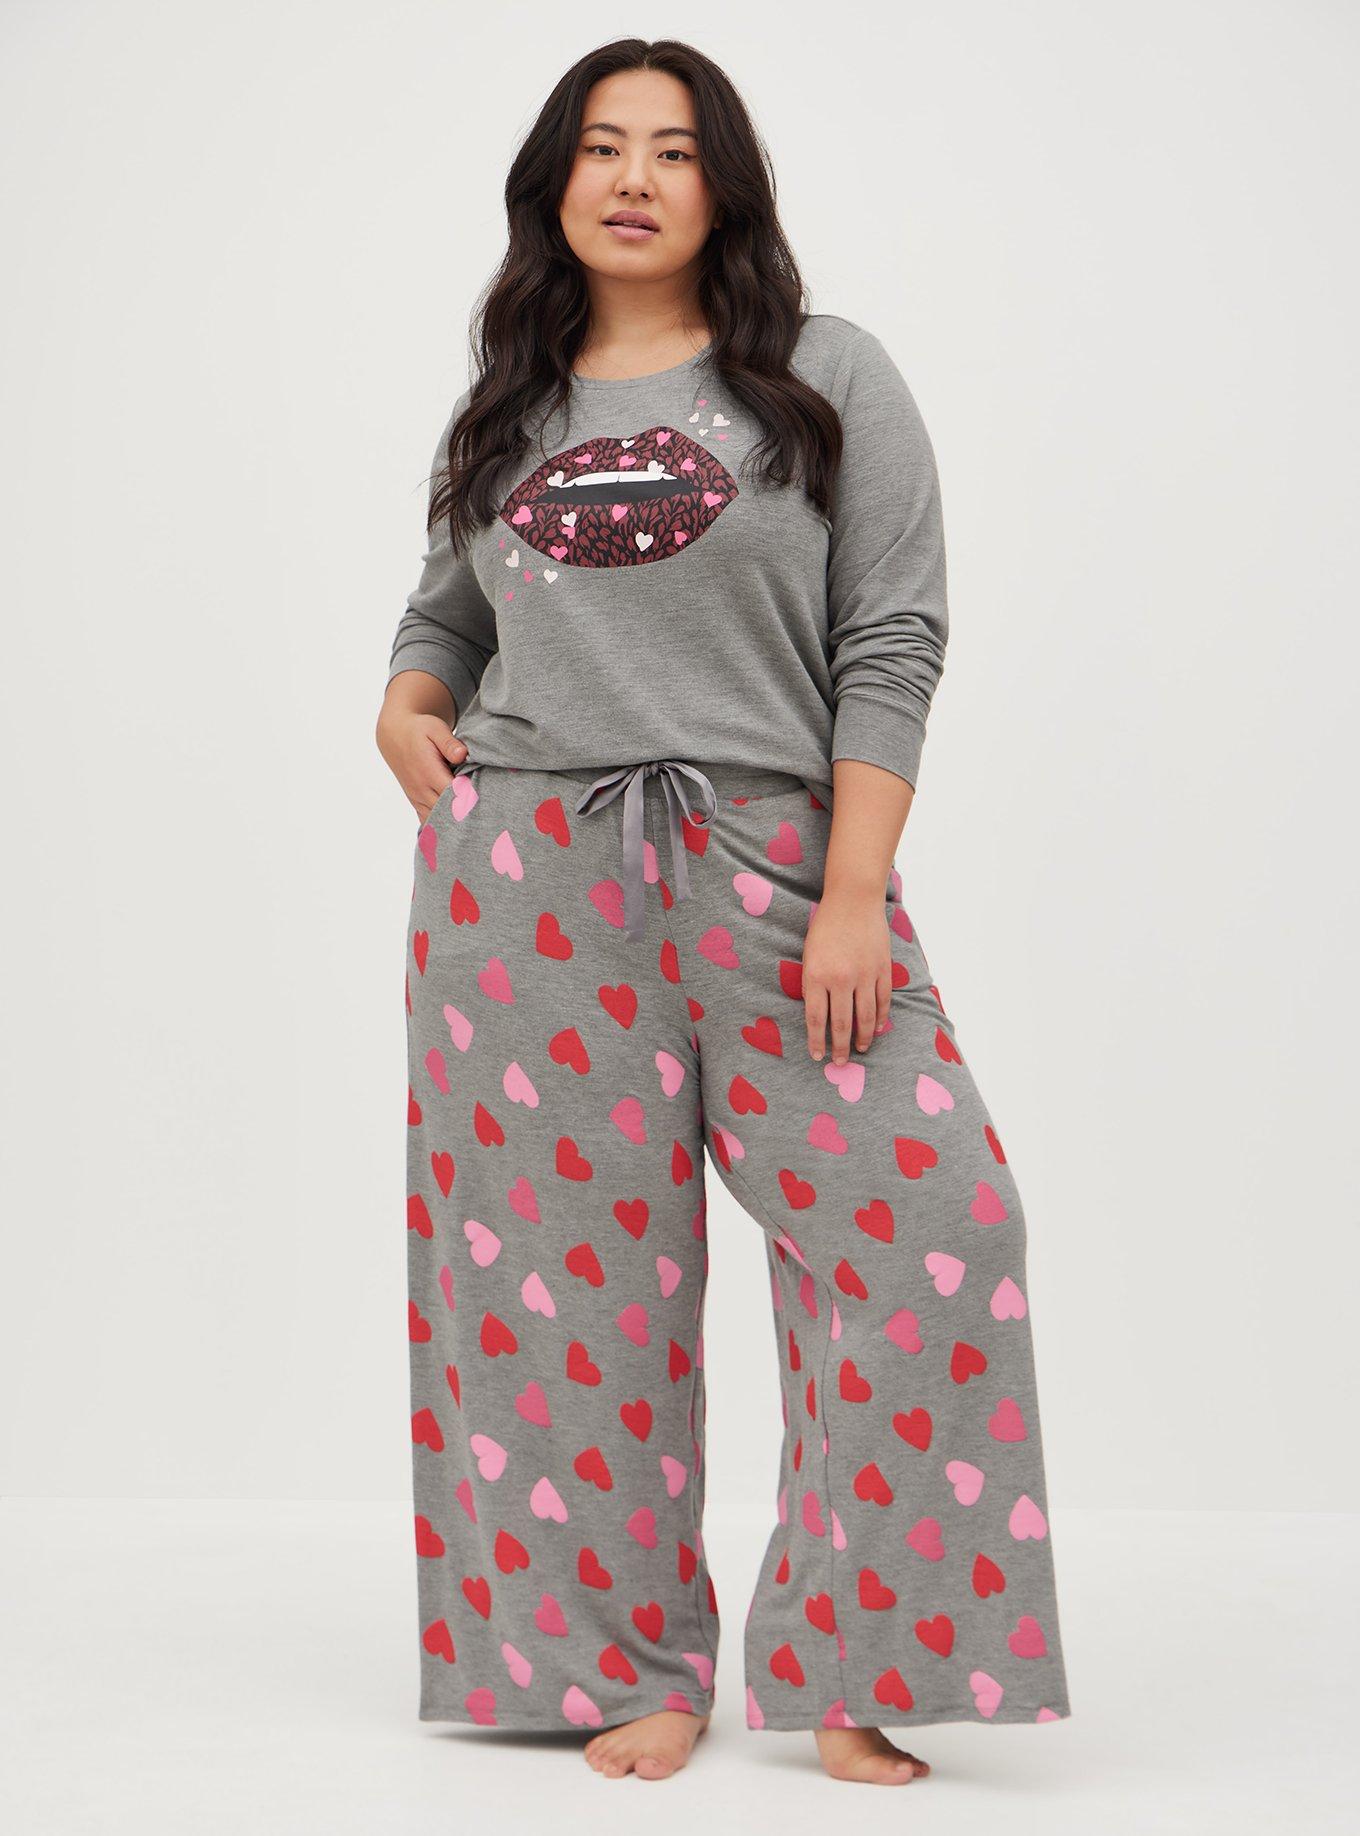 Dreams & Co. Women's Plus Size Relaxed Pajama Pant, 22/24 - Black